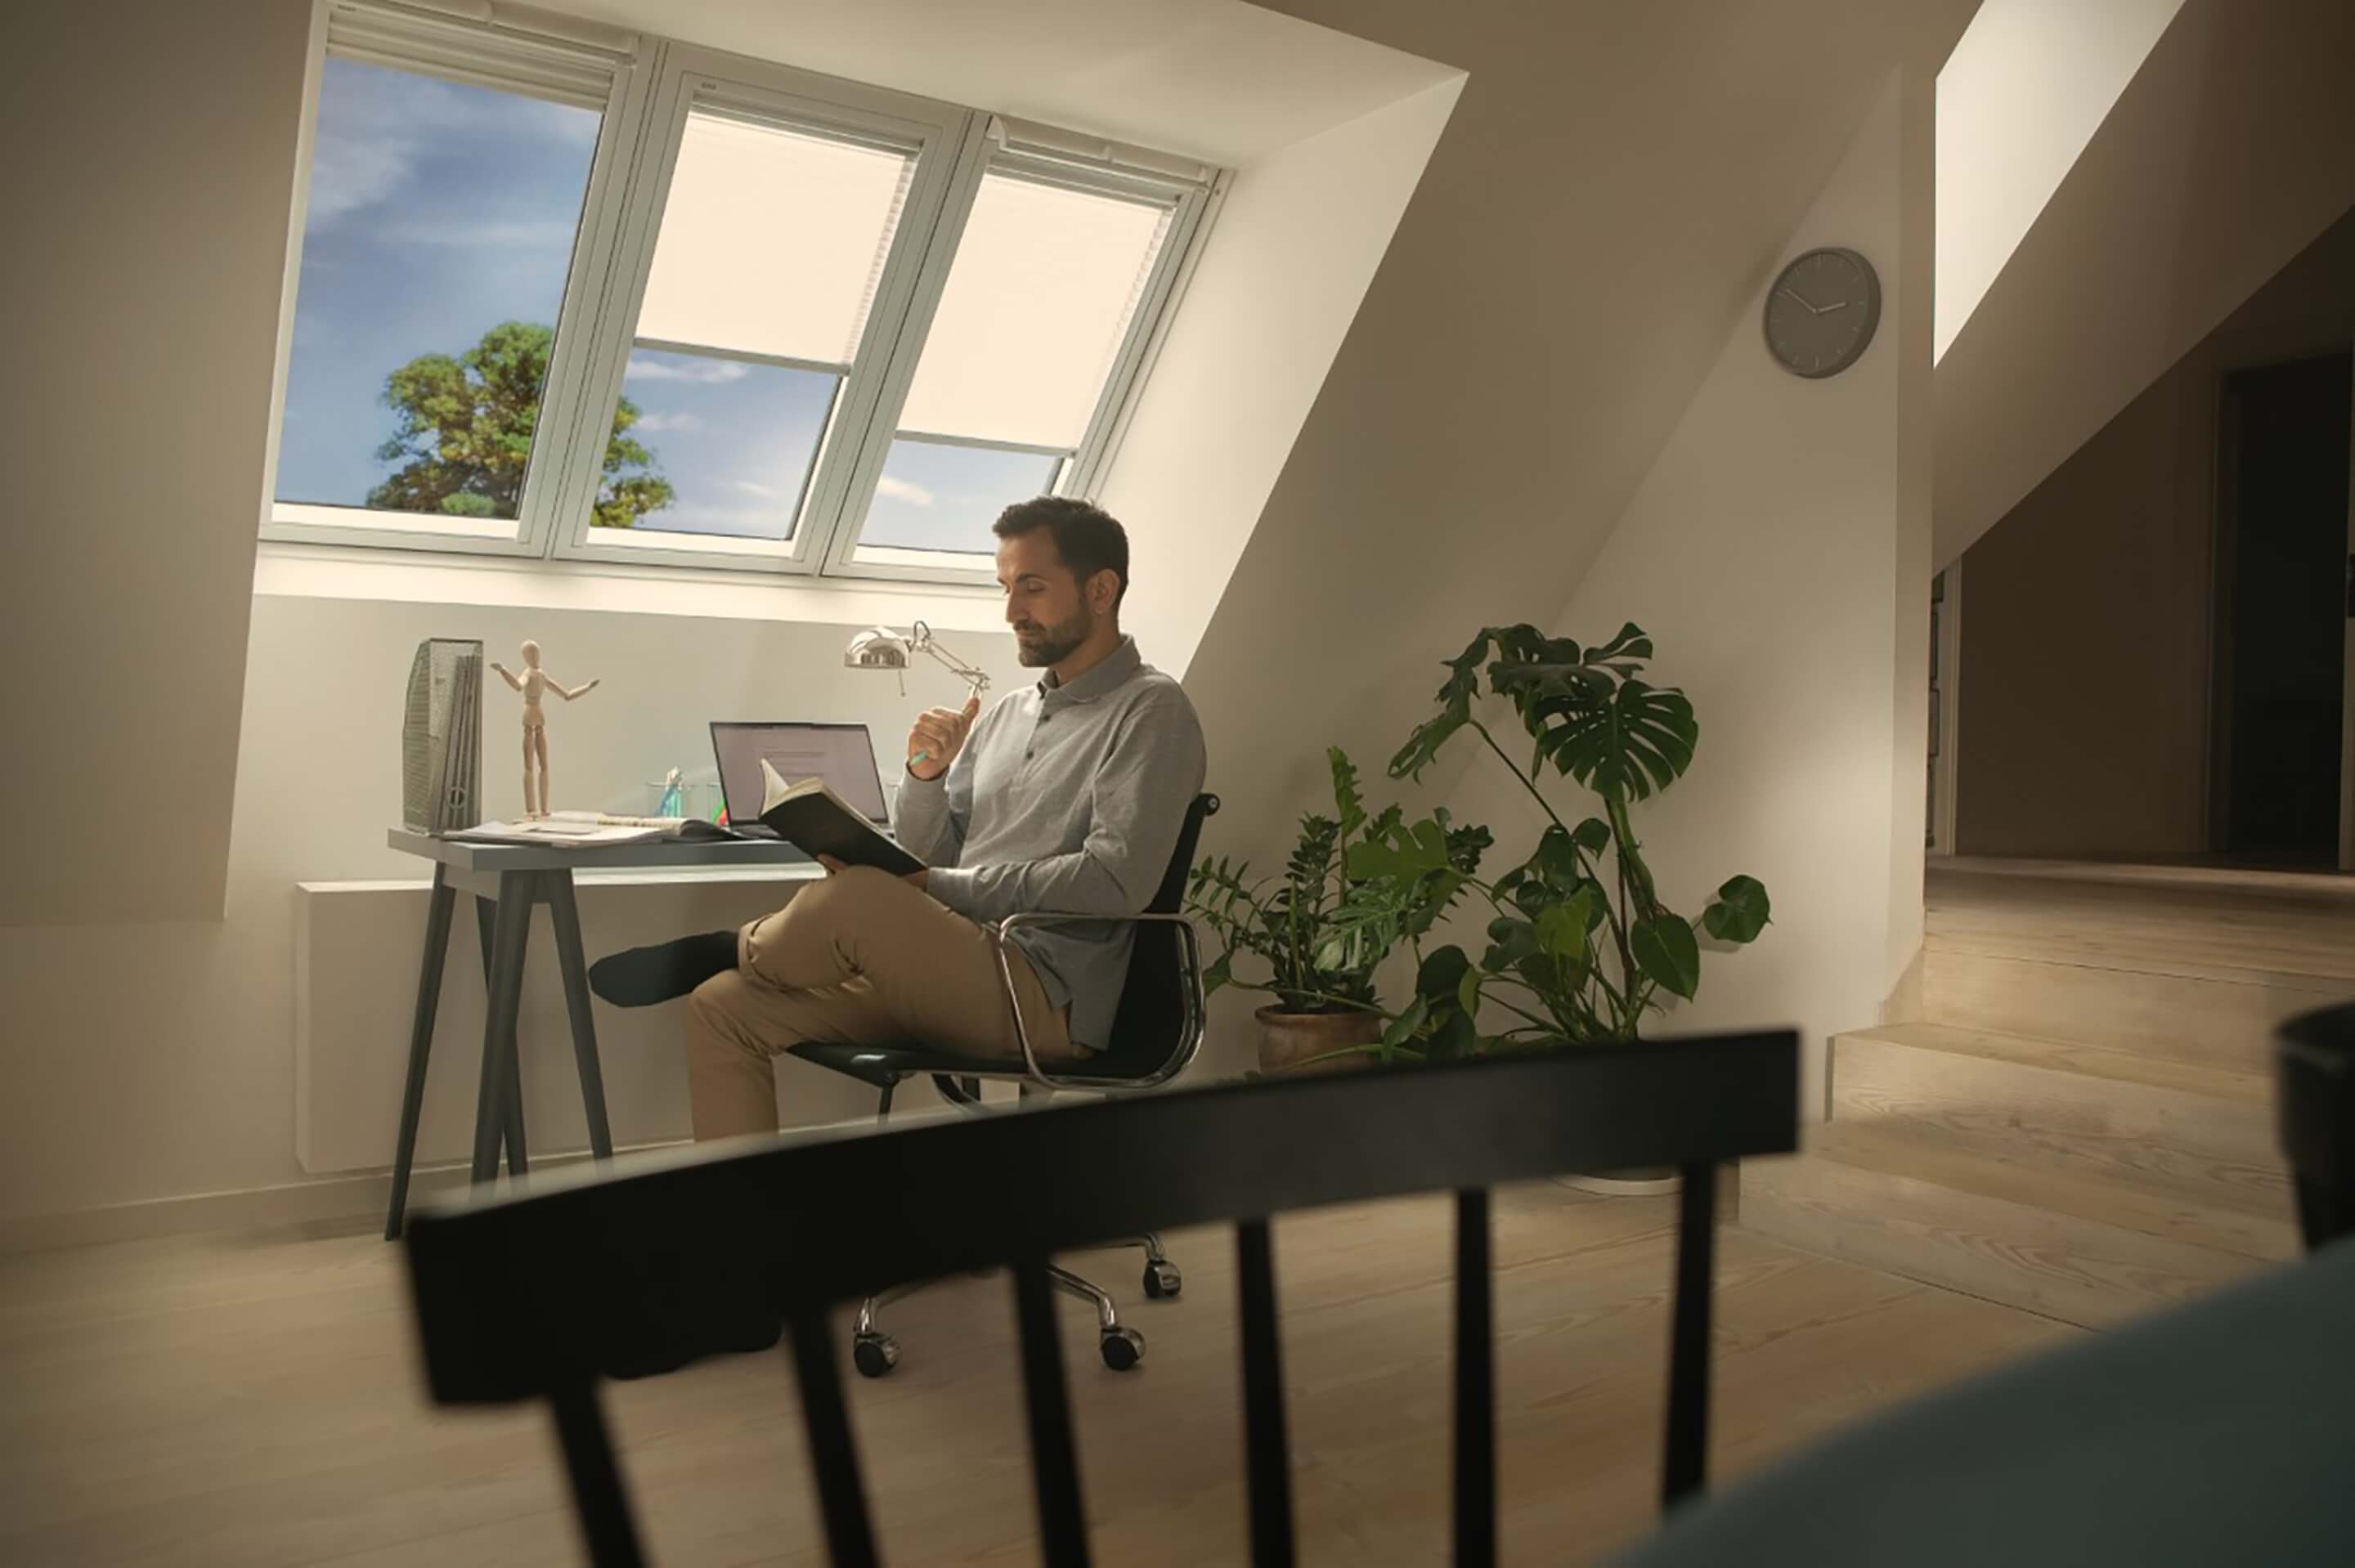 Man sitting at a desk with VELUX roof windows and blinds in the background